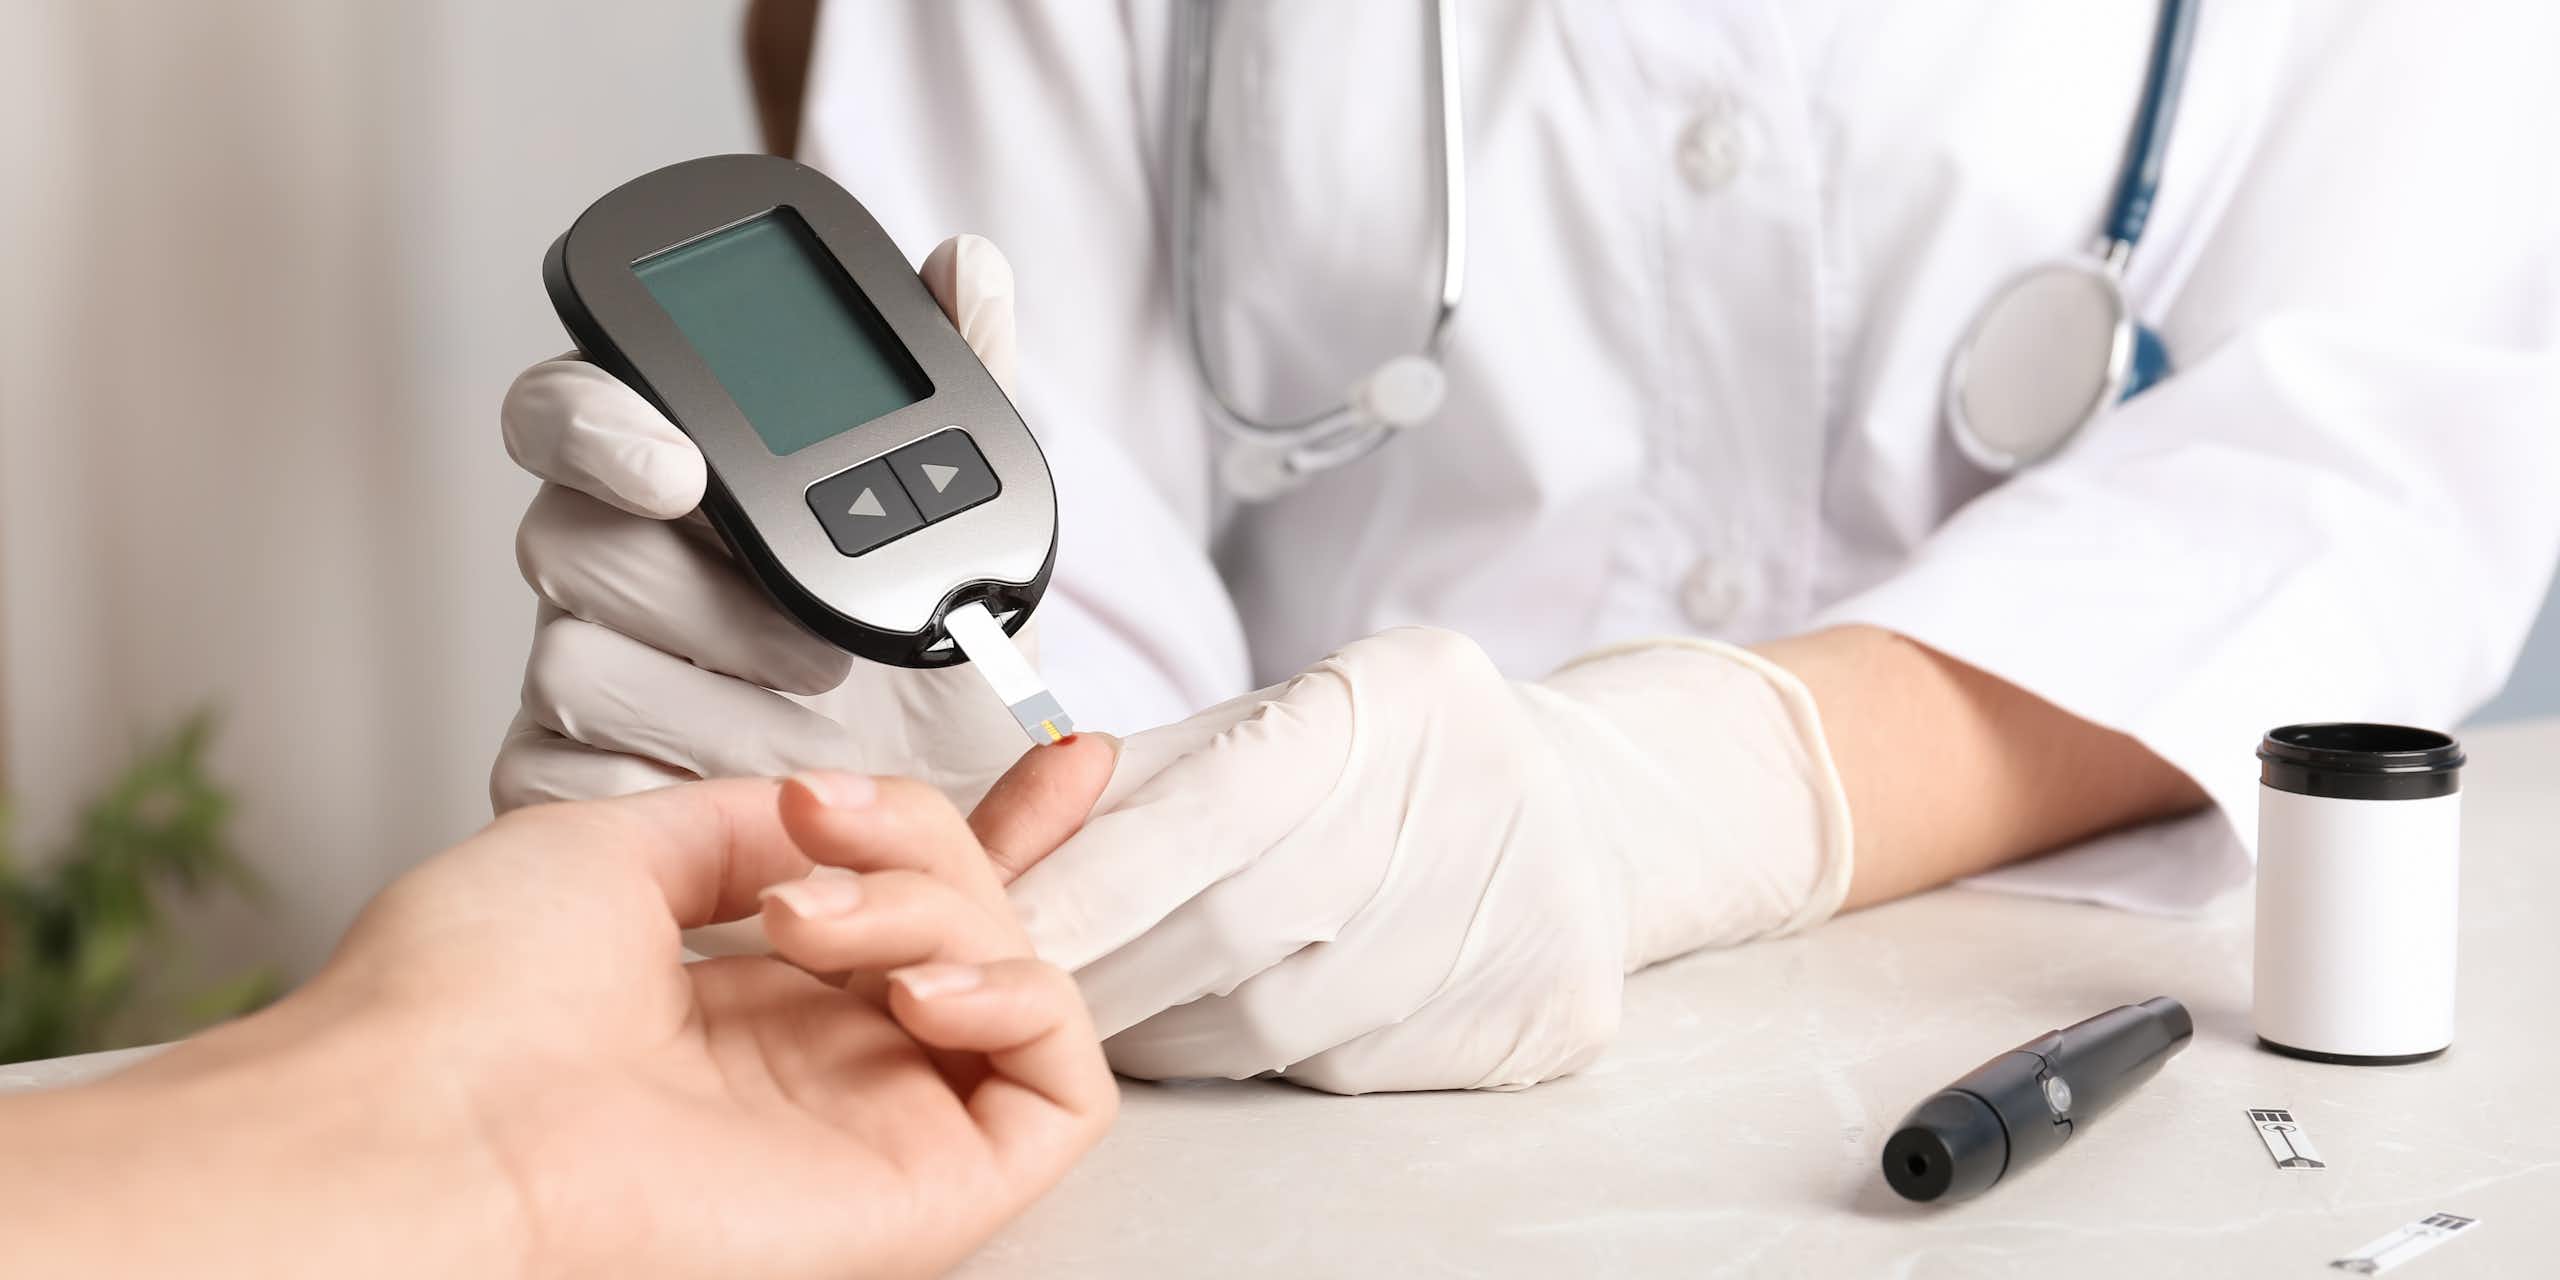 Gloved hands of a health-care worker testing a patient's finger with a glucose meter